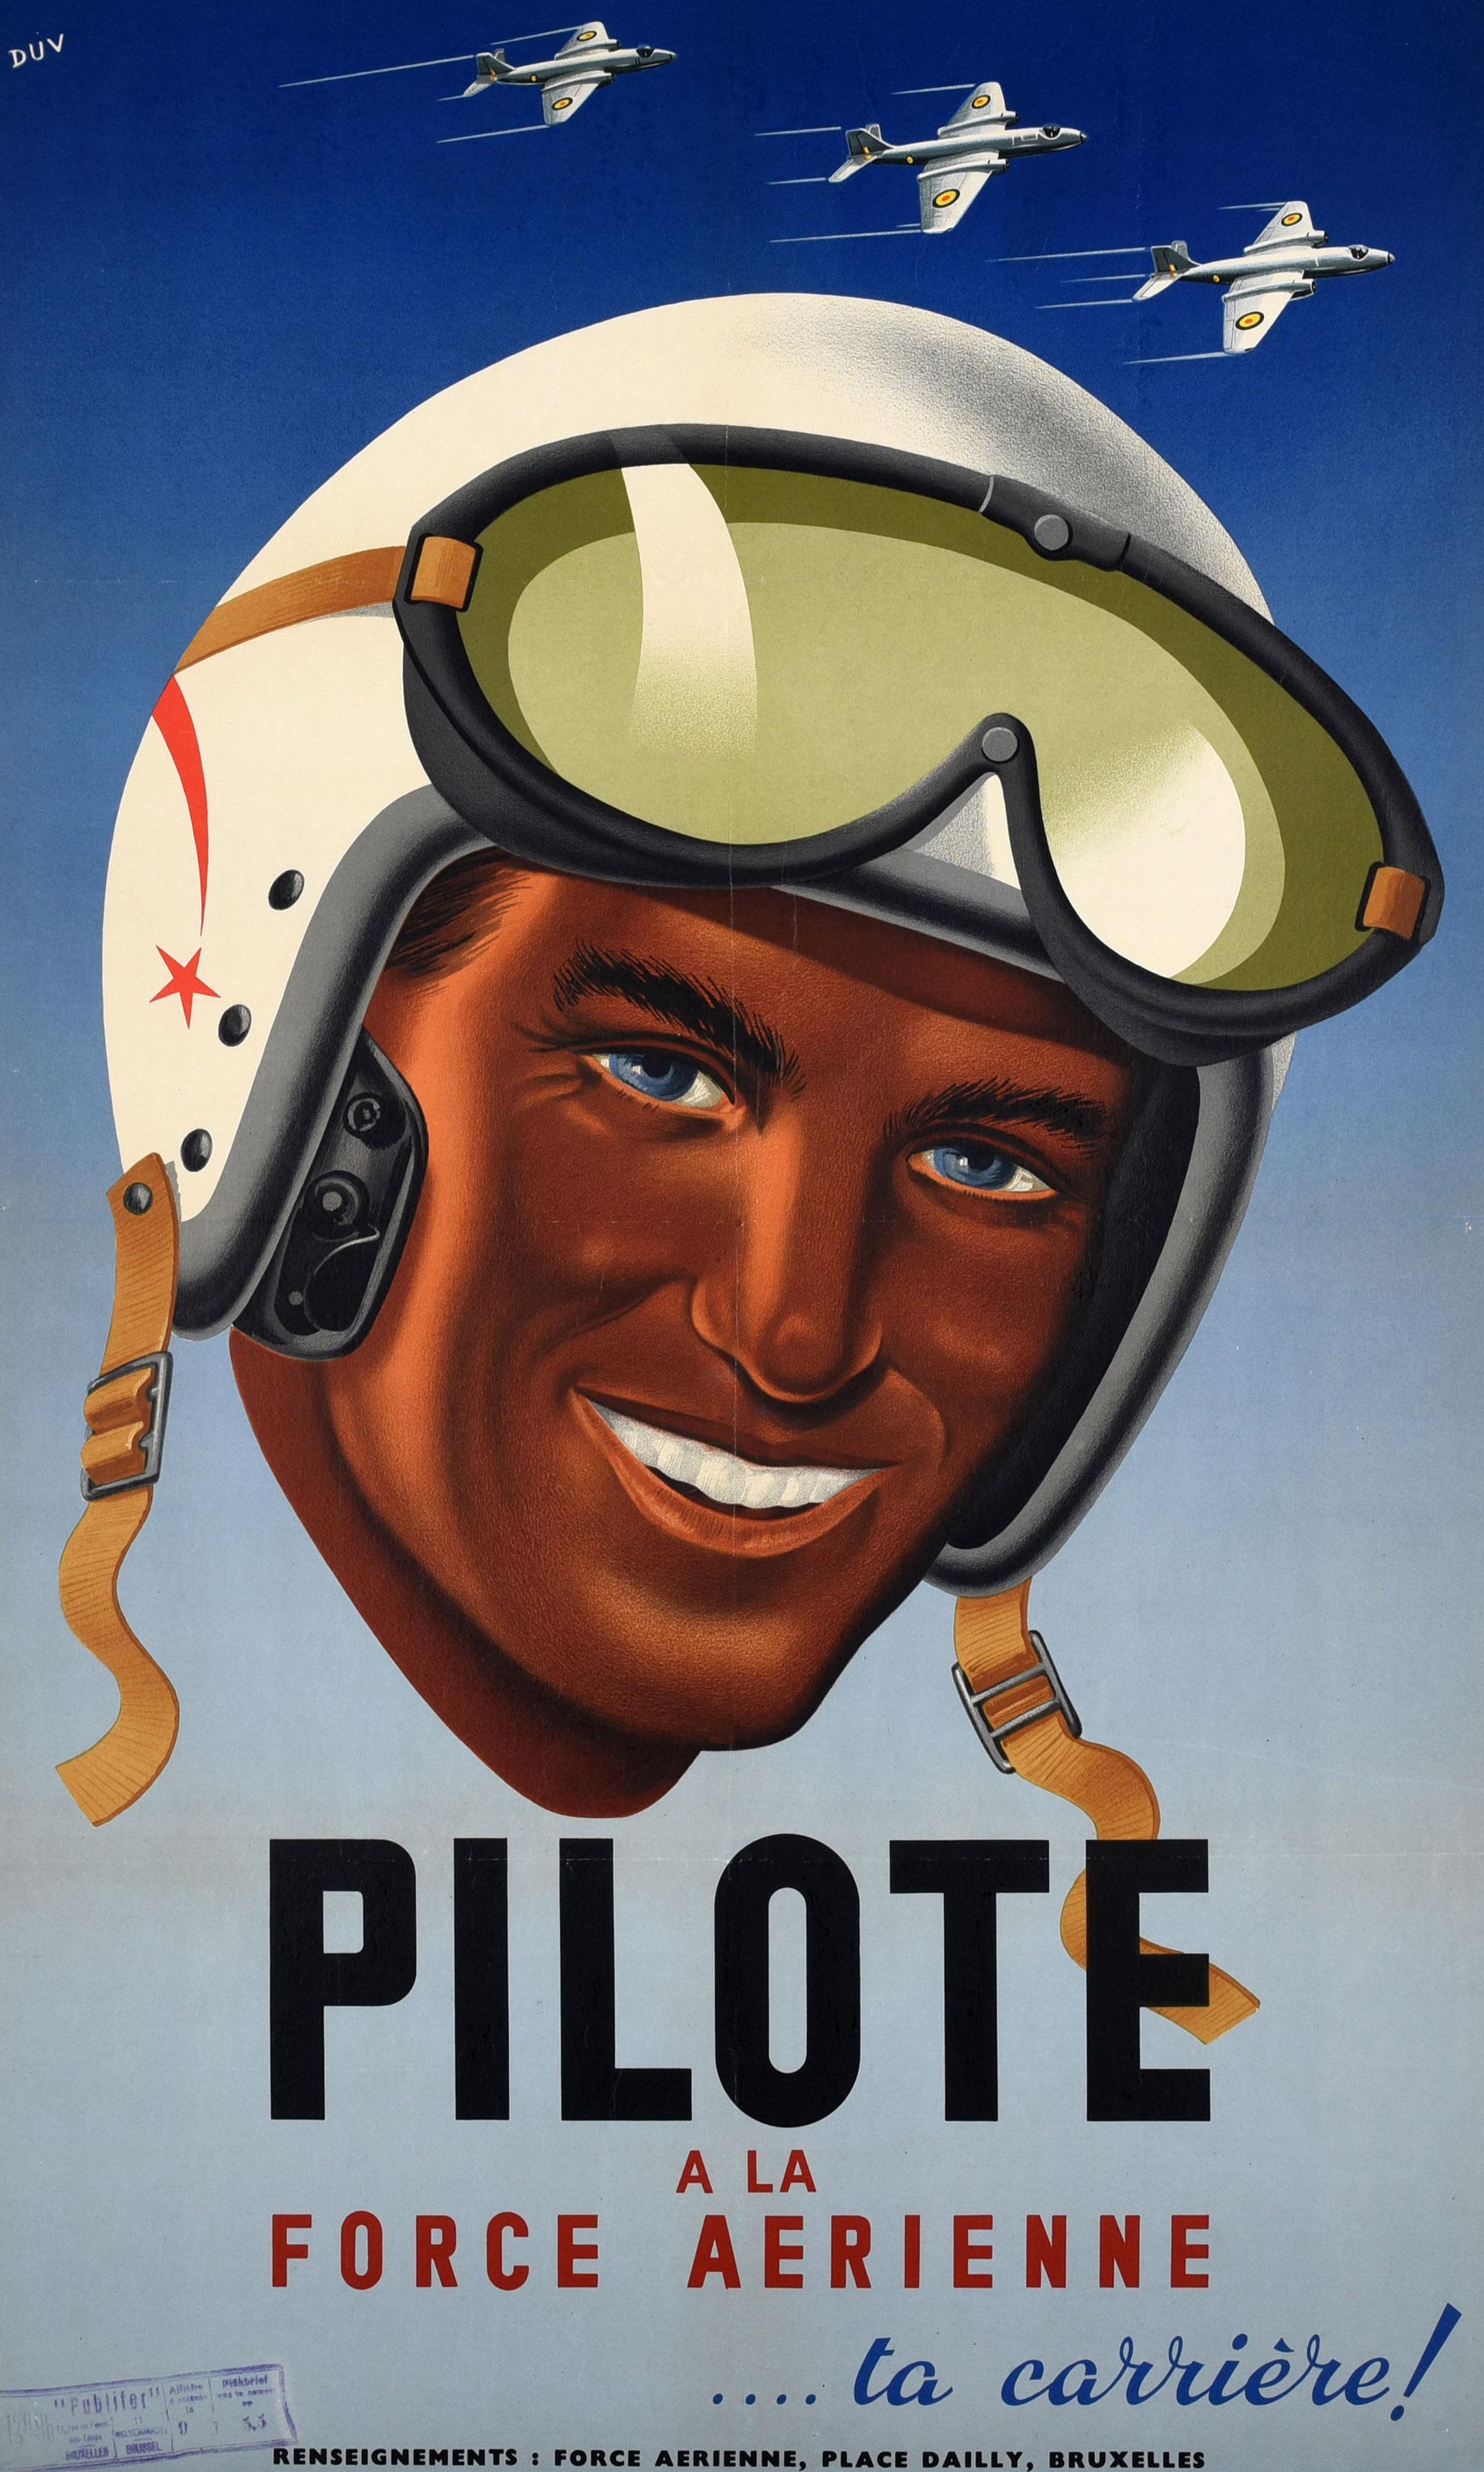 Original vintage recruitment poster - Air Force Pilot ... Your Career / Pilote a la Force Aerienne ... ta carrière! Great design featuring a smiling man wearing a pilot's helmet and goggles with three military planes flying overhead on a blue